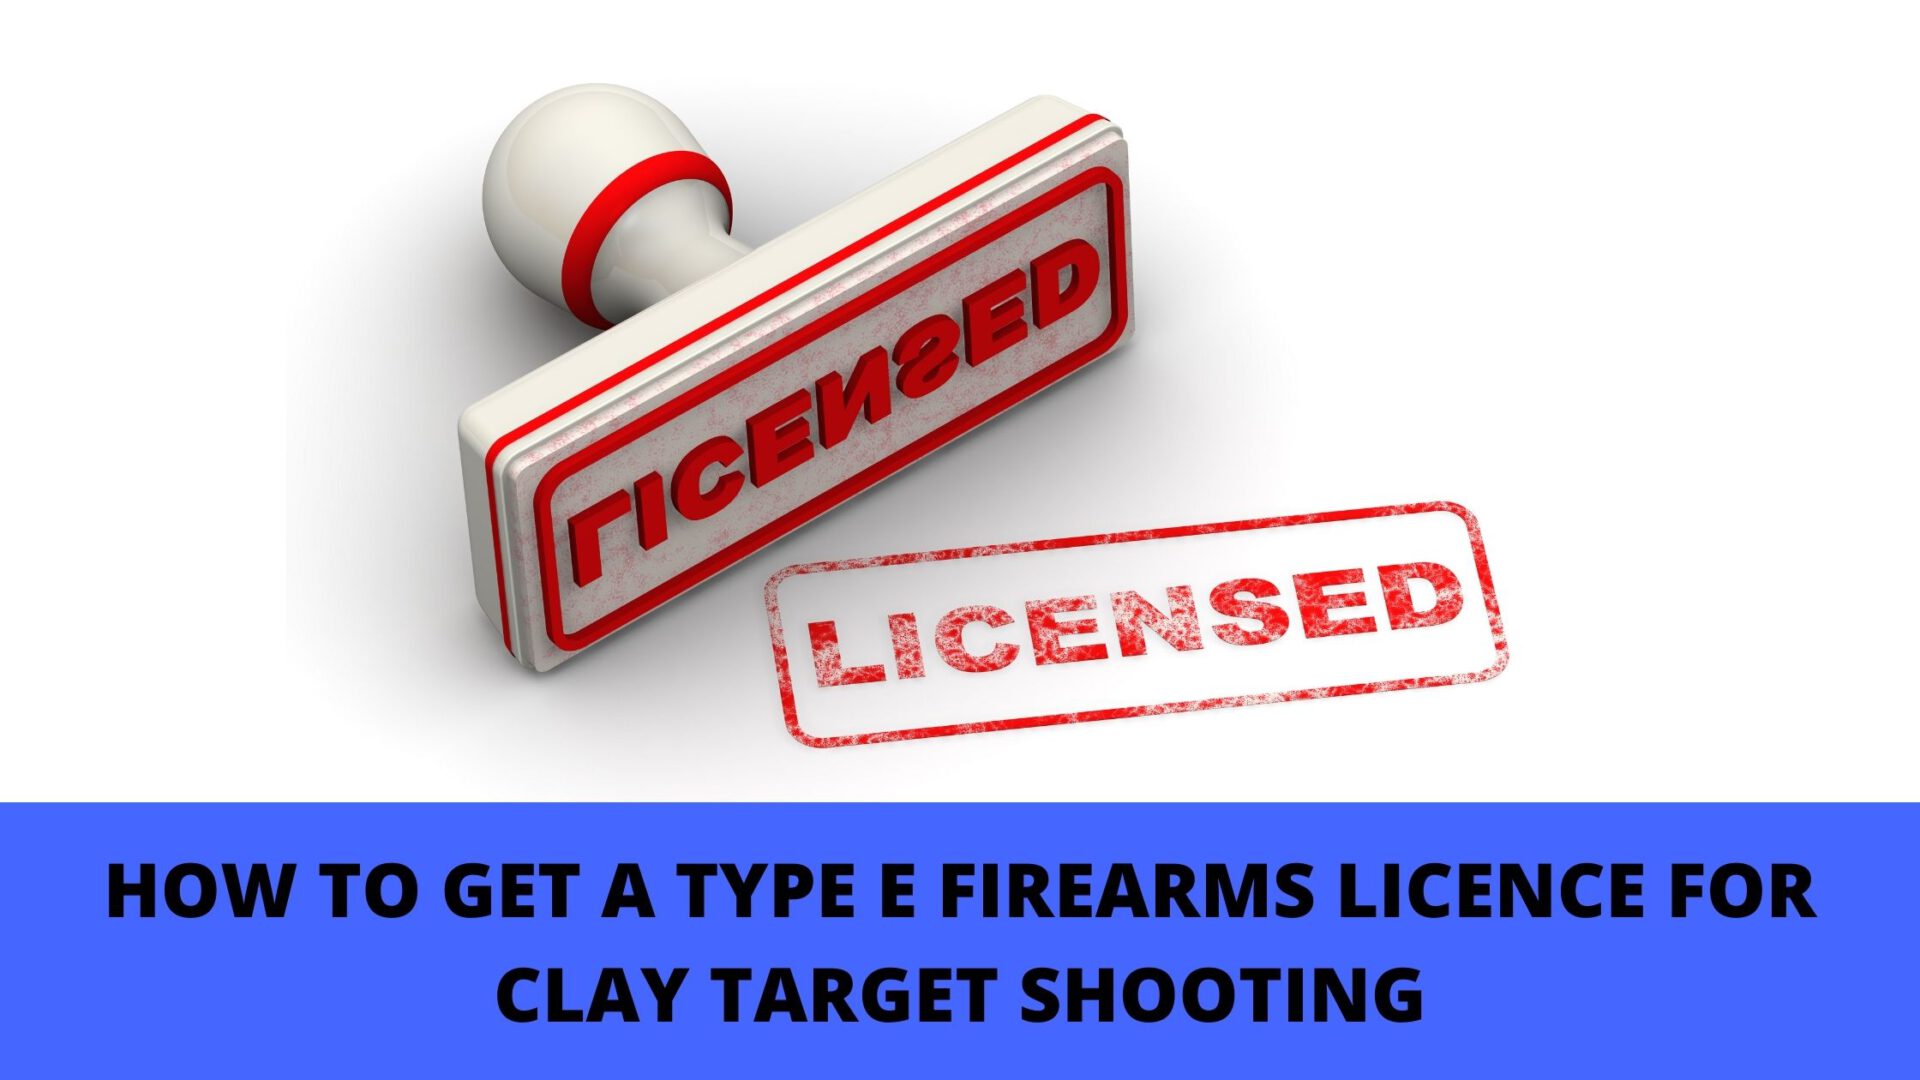 CORSIVIA-HOW-TO-GET-A-TYPE-E-FIREARMS-LICENCE-FOR-CLAY-TARGET-SHOOTING